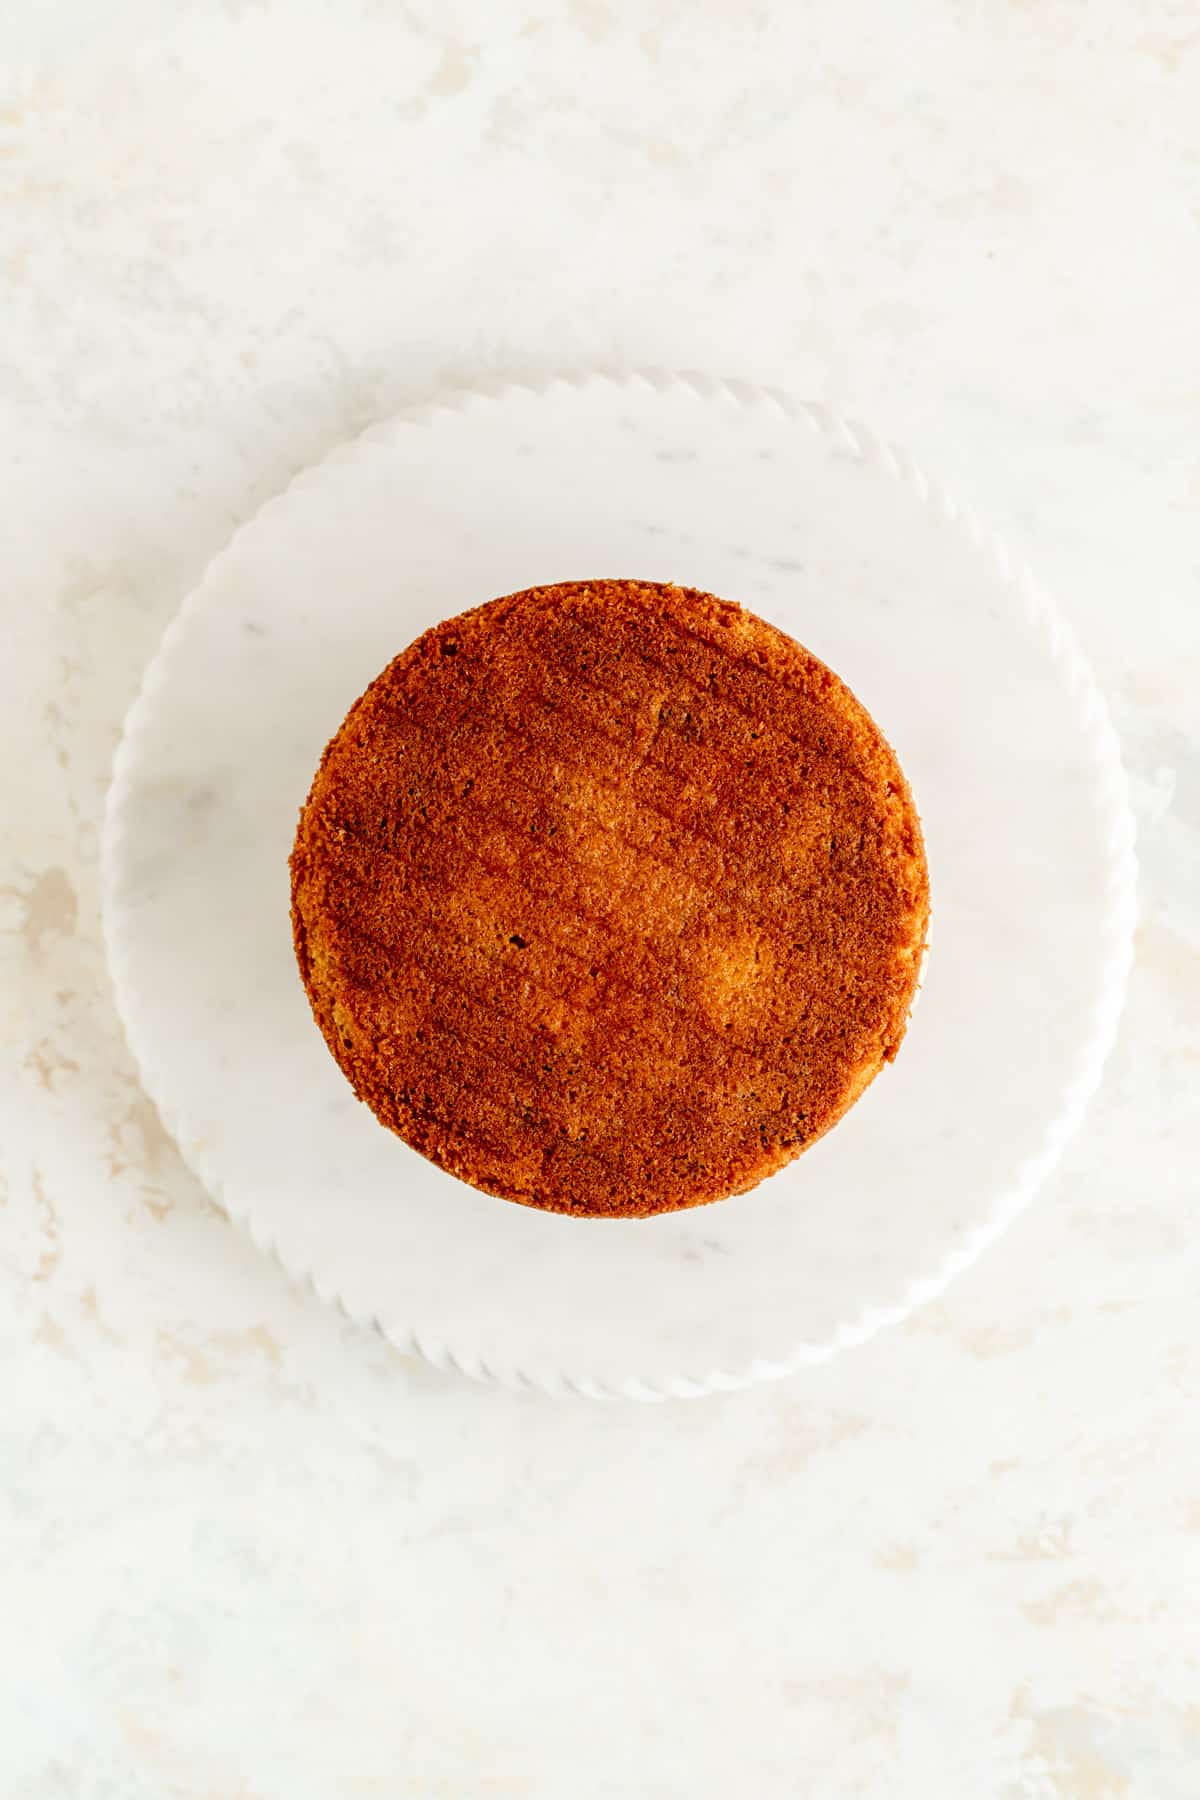 Overhead view of upside down top cake layer on white marble plate and white background.